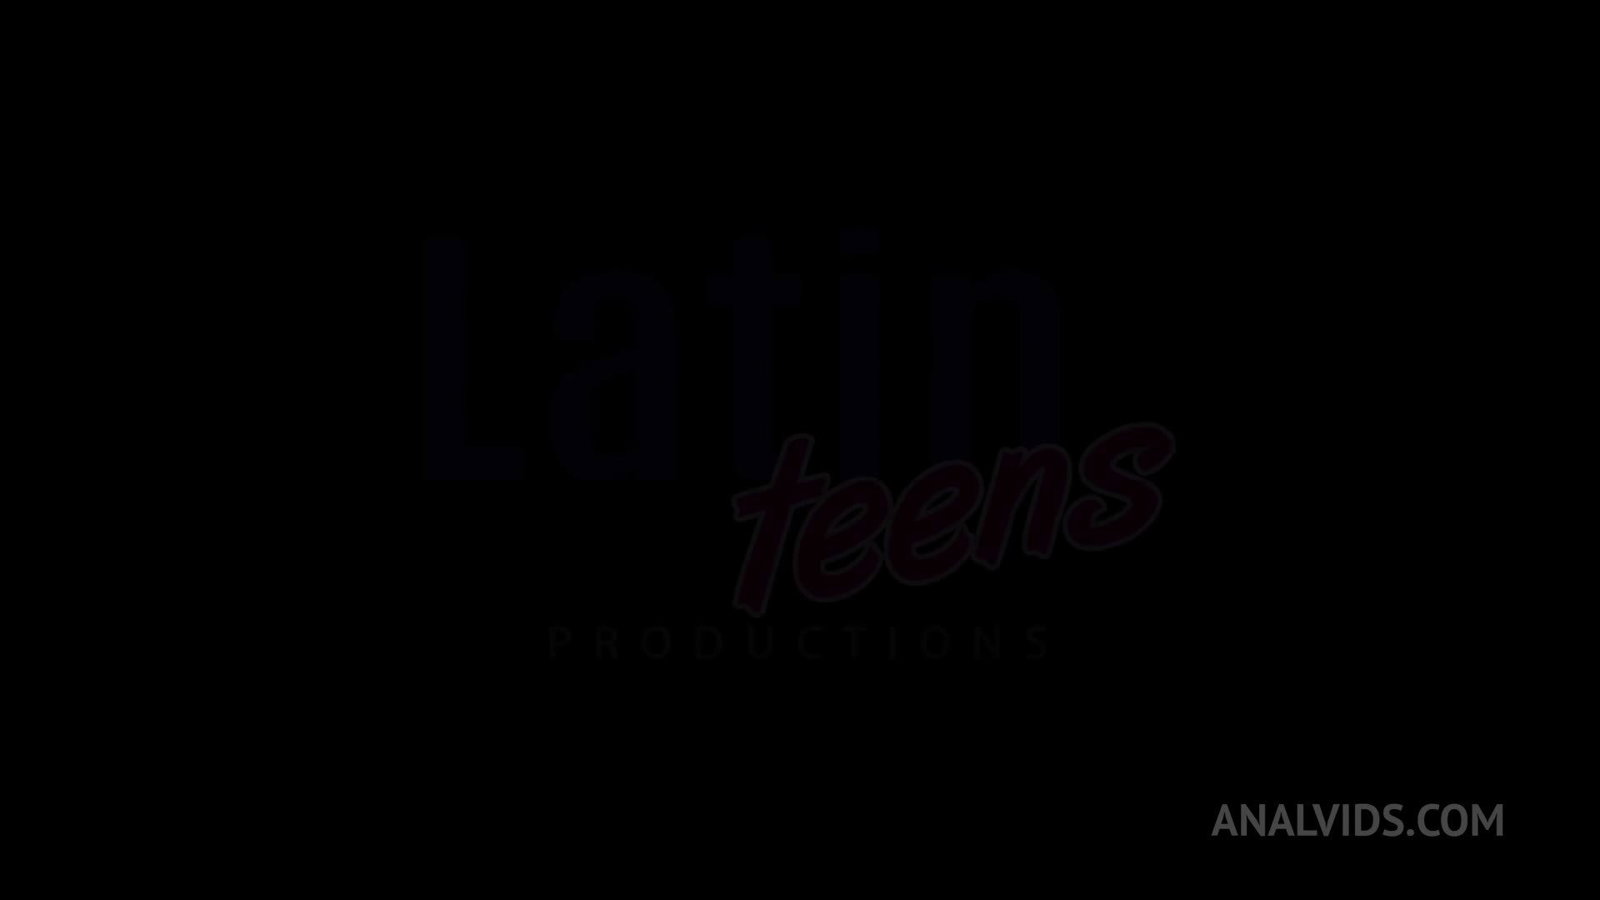 Video by AnalVids with the username @AnalVids, who is a brand user,  April 4, 2022 at 12:02 PM. The post is about the topic Latinas and the text says 'Beautiful HELEN STAR gets balls deep in DP by three huge cocks

#HelenStar #Bruno #DavidBander #Brandon

🍑 https://sharesome.com/get/HelenStar'